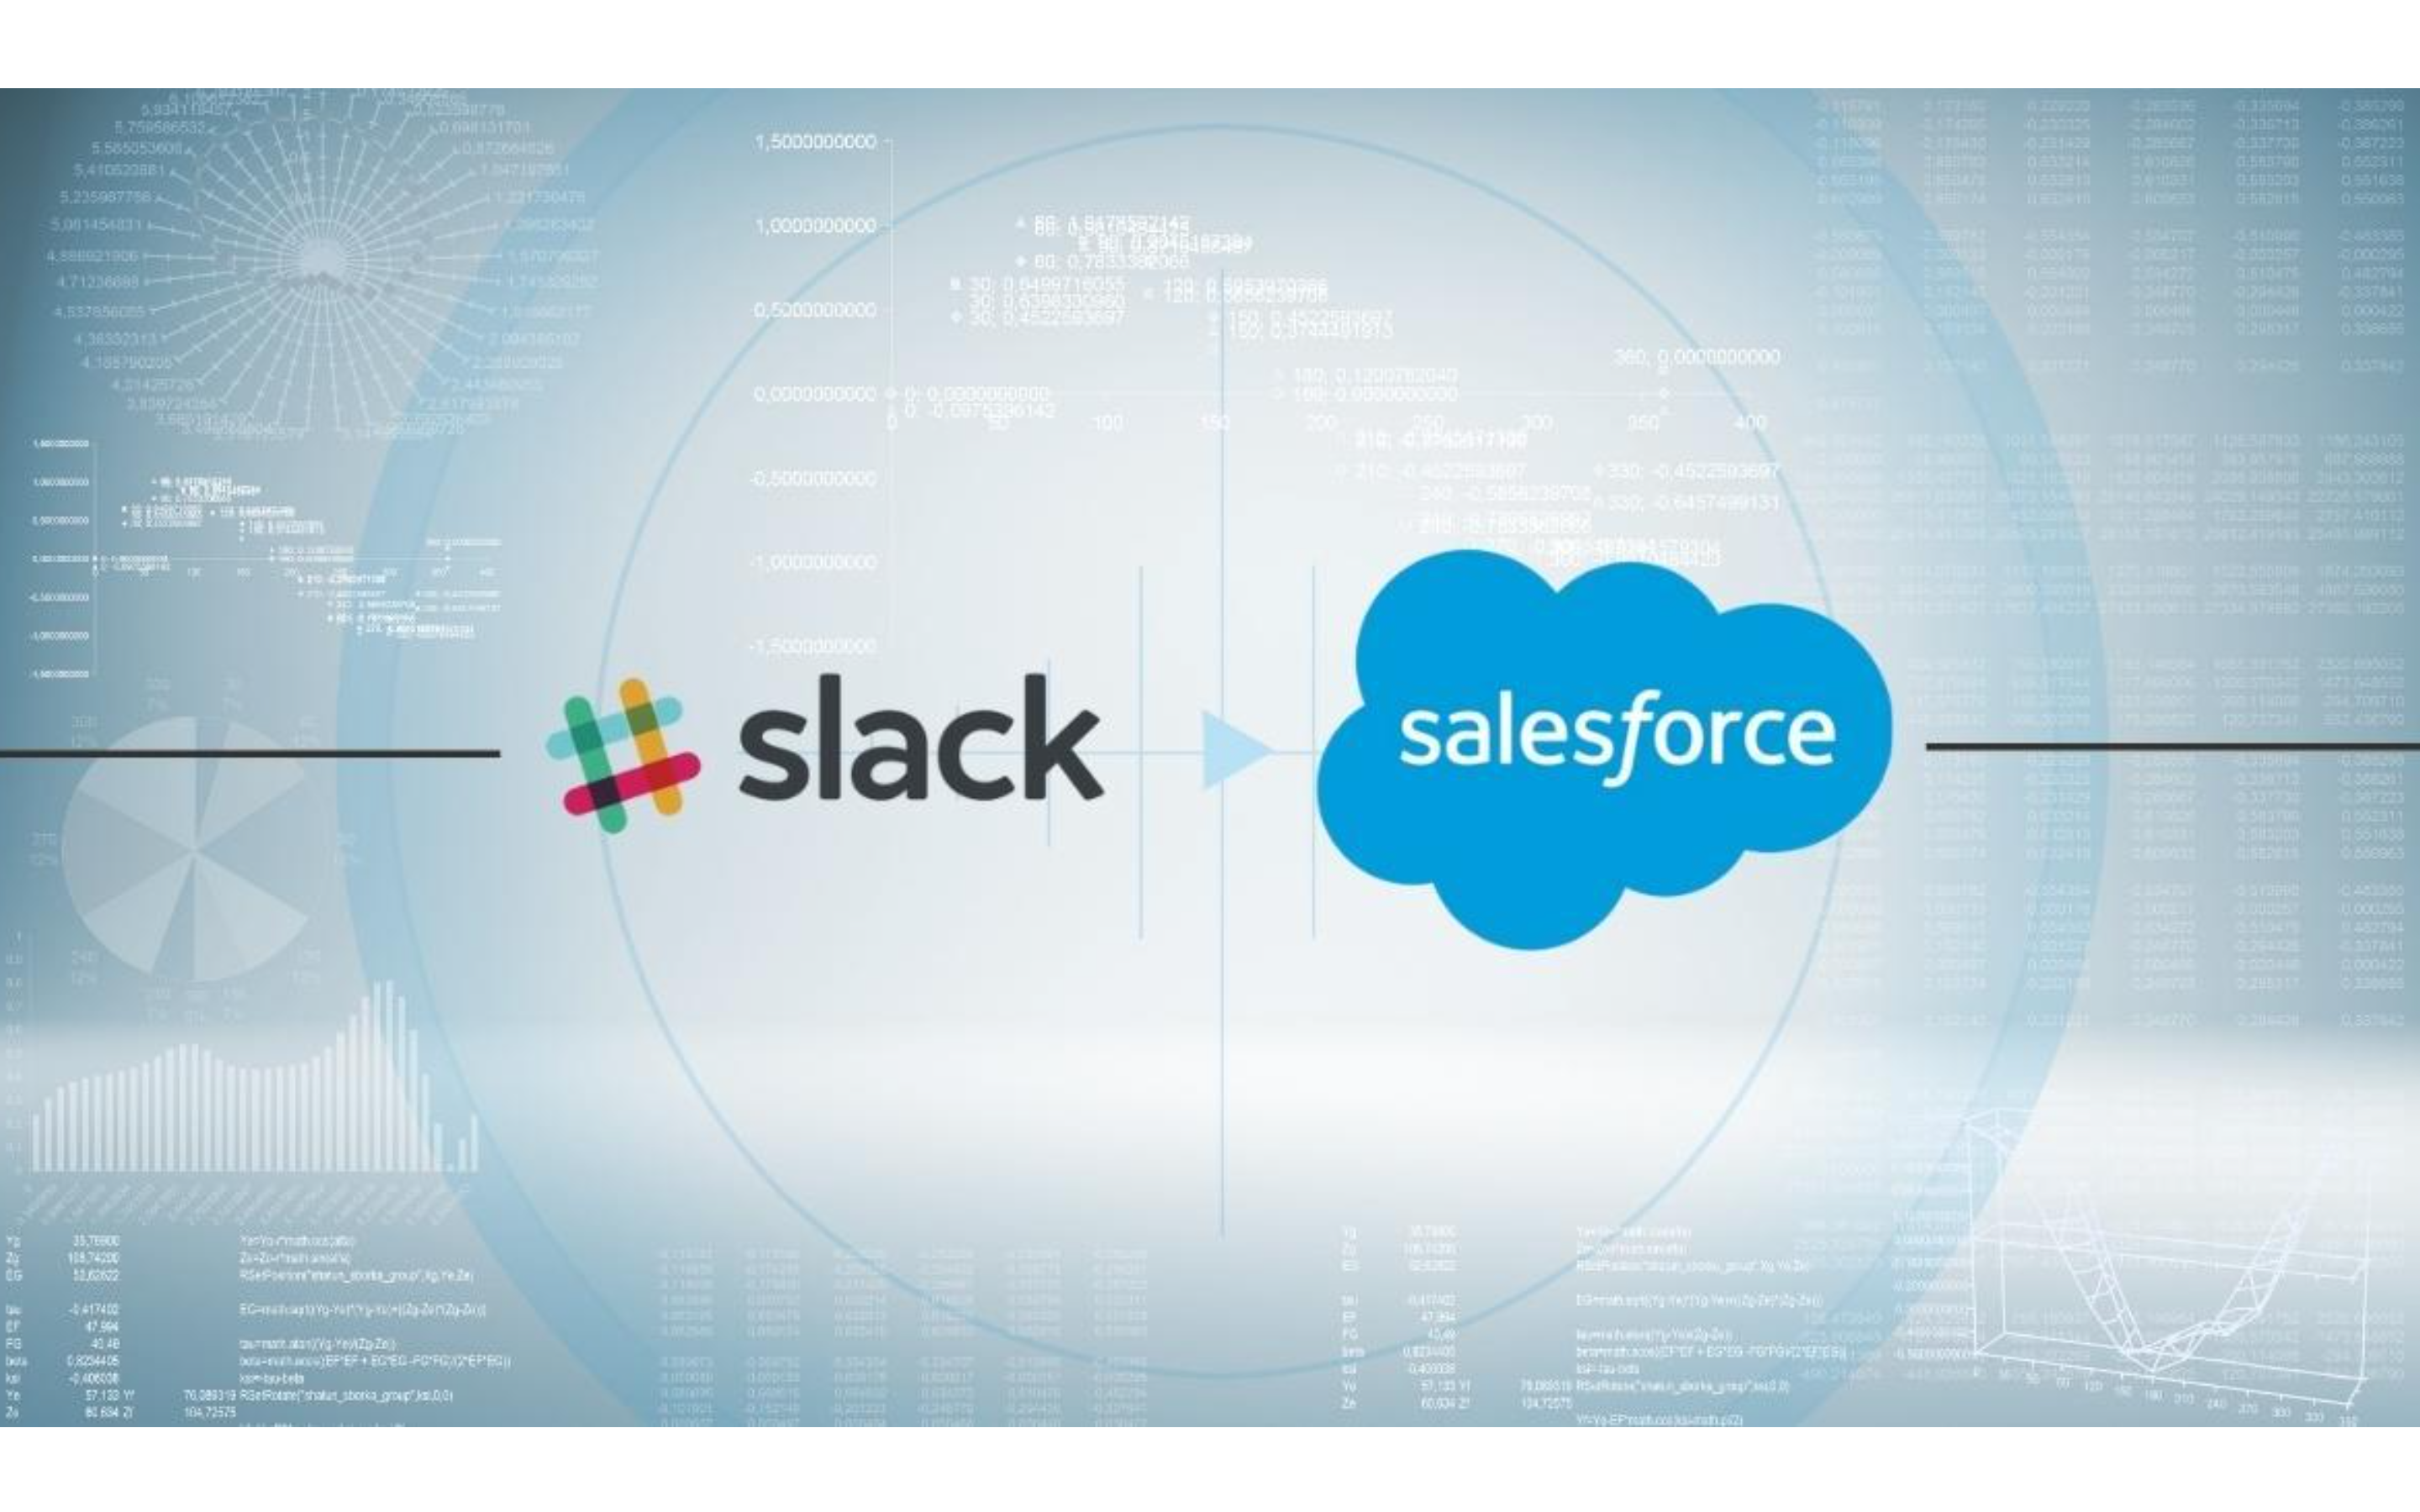 Learn how to Schedule Salesforce Reports for Slack